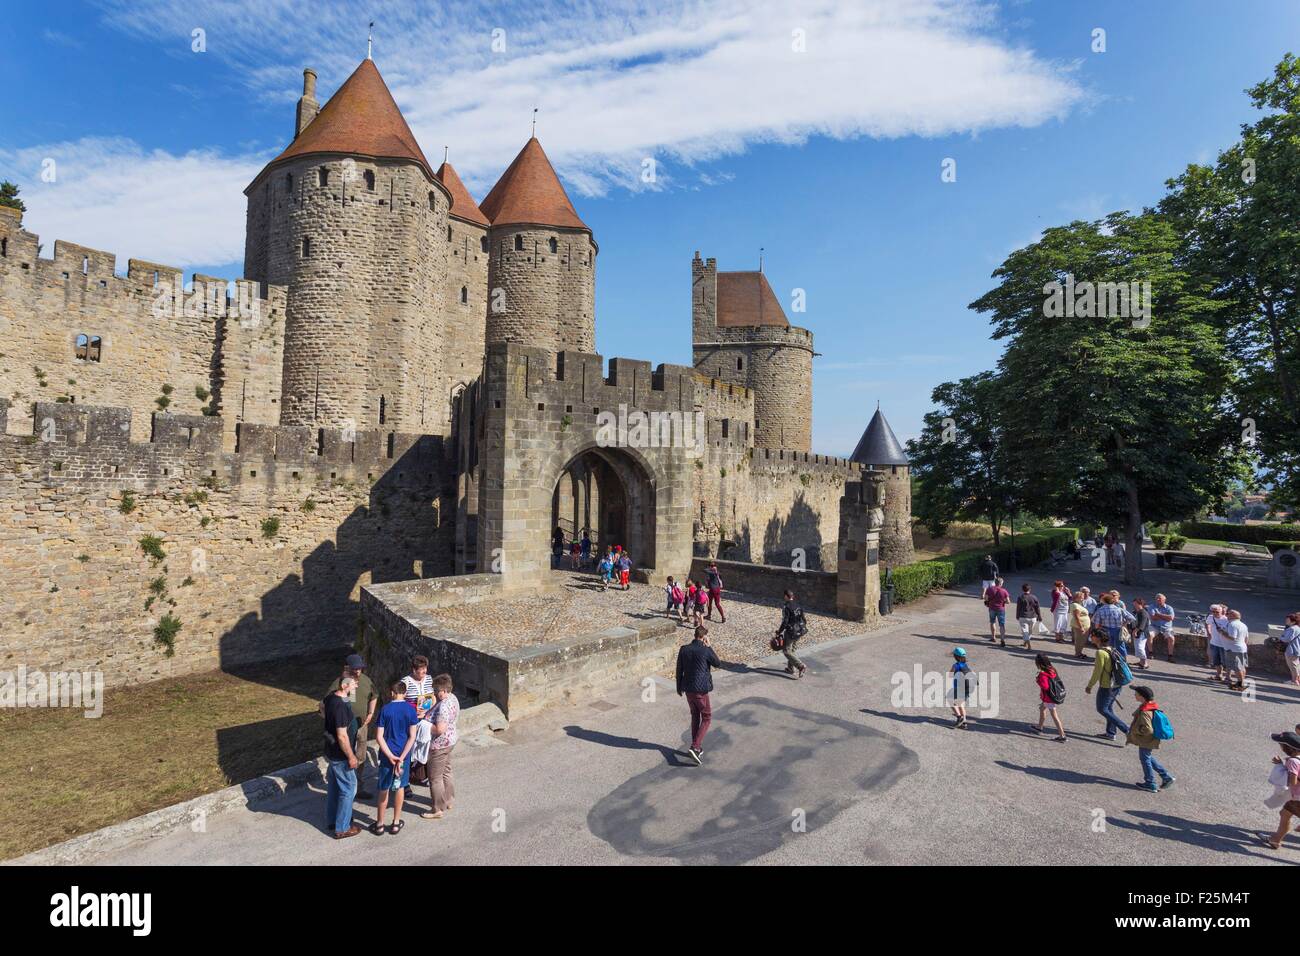 France, Aude, Carcassonne, medieval town listed as World Heritage by UNESCO, Stock Photo